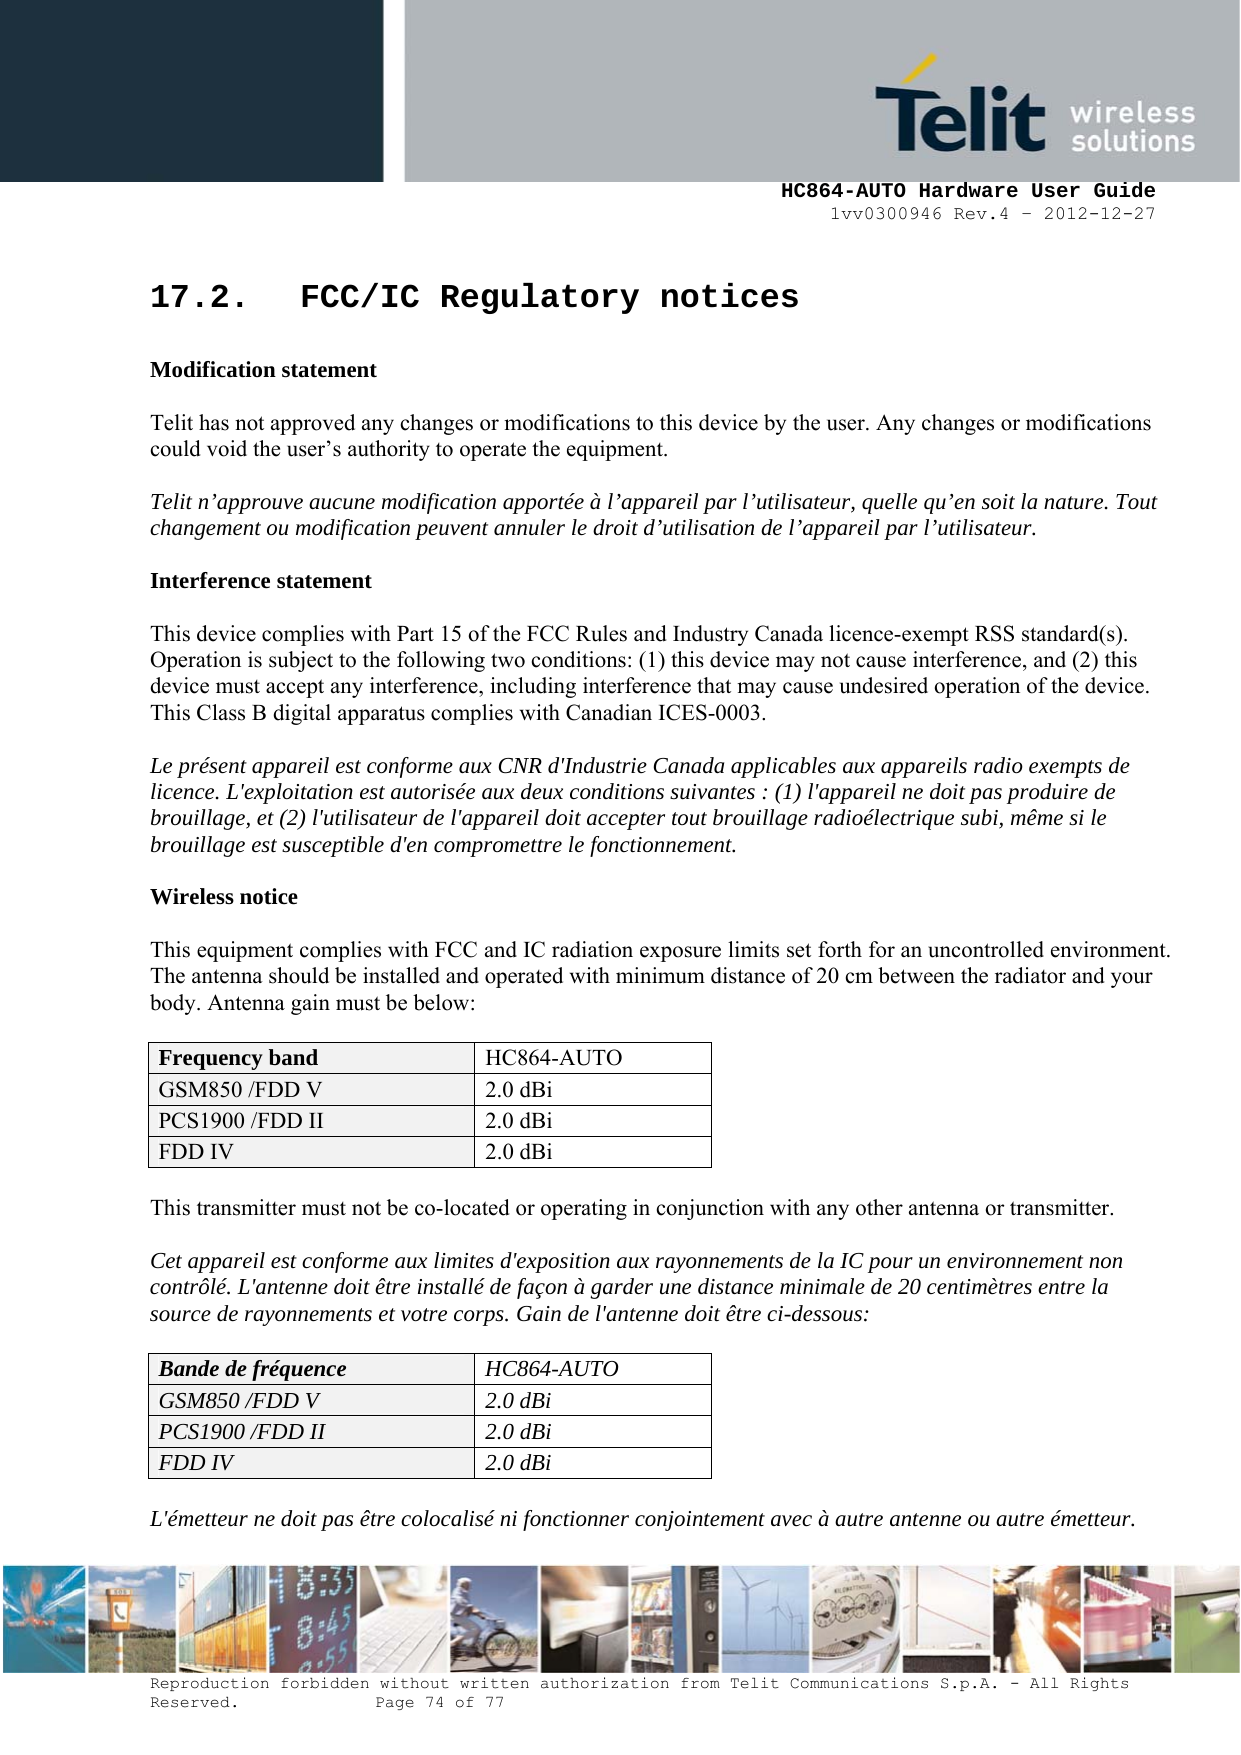     HC864-AUTO Hardware User Guide 1vv0300946 Rev.4 – 2012-12-27 Reproduction forbidden without written authorization from Telit Communications S.p.A. - All Rights Reserved.    Page 74 of 77  17.2. FCC/IC Regulatory notices  Modification statement  Telit has not approved any changes or modifications to this device by the user. Any changes or modifications could void the user’s authority to operate the equipment.  Telit n’approuve aucune modification apportée à l’appareil par l’utilisateur, quelle qu’en soit la nature. Tout changement ou modification peuvent annuler le droit d’utilisation de l’appareil par l’utilisateur.  Interference statement  This device complies with Part 15 of the FCC Rules and Industry Canada licence-exempt RSS standard(s). Operation is subject to the following two conditions: (1) this device may not cause interference, and (2) this device must accept any interference, including interference that may cause undesired operation of the device. This Class B digital apparatus complies with Canadian ICES-0003.  Le présent appareil est conforme aux CNR d&apos;Industrie Canada applicables aux appareils radio exempts de licence. L&apos;exploitation est autorisée aux deux conditions suivantes : (1) l&apos;appareil ne doit pas produire de brouillage, et (2) l&apos;utilisateur de l&apos;appareil doit accepter tout brouillage radioélectrique subi, même si le brouillage est susceptible d&apos;en compromettre le fonctionnement.  Wireless notice  This equipment complies with FCC and IC radiation exposure limits set forth for an uncontrolled environment. The antenna should be installed and operated with minimum distance of 20 cm between the radiator and your body. Antenna gain must be below:  Frequency band HC864-AUTO GSM850 /FDD V  2.0 dBi PCS1900 /FDD II  2.0 dBi FDD IV  2.0 dBi  This transmitter must not be co-located or operating in conjunction with any other antenna or transmitter.  Cet appareil est conforme aux limites d&apos;exposition aux rayonnements de la IC pour un environnement non contrôlé. L&apos;antenne doit être installé de façon à garder une distance minimale de 20 centimètres entre la source de rayonnements et votre corps. Gain de l&apos;antenne doit être ci-dessous:  Bande de fréquence HC864-AUTO GSM850 /FDD V  2.0 dBi PCS1900 /FDD II  2.0 dBi FDD IV  2.0 dBi  L&apos;émetteur ne doit pas être colocalisé ni fonctionner conjointement avec à autre antenne ou autre émetteur.  